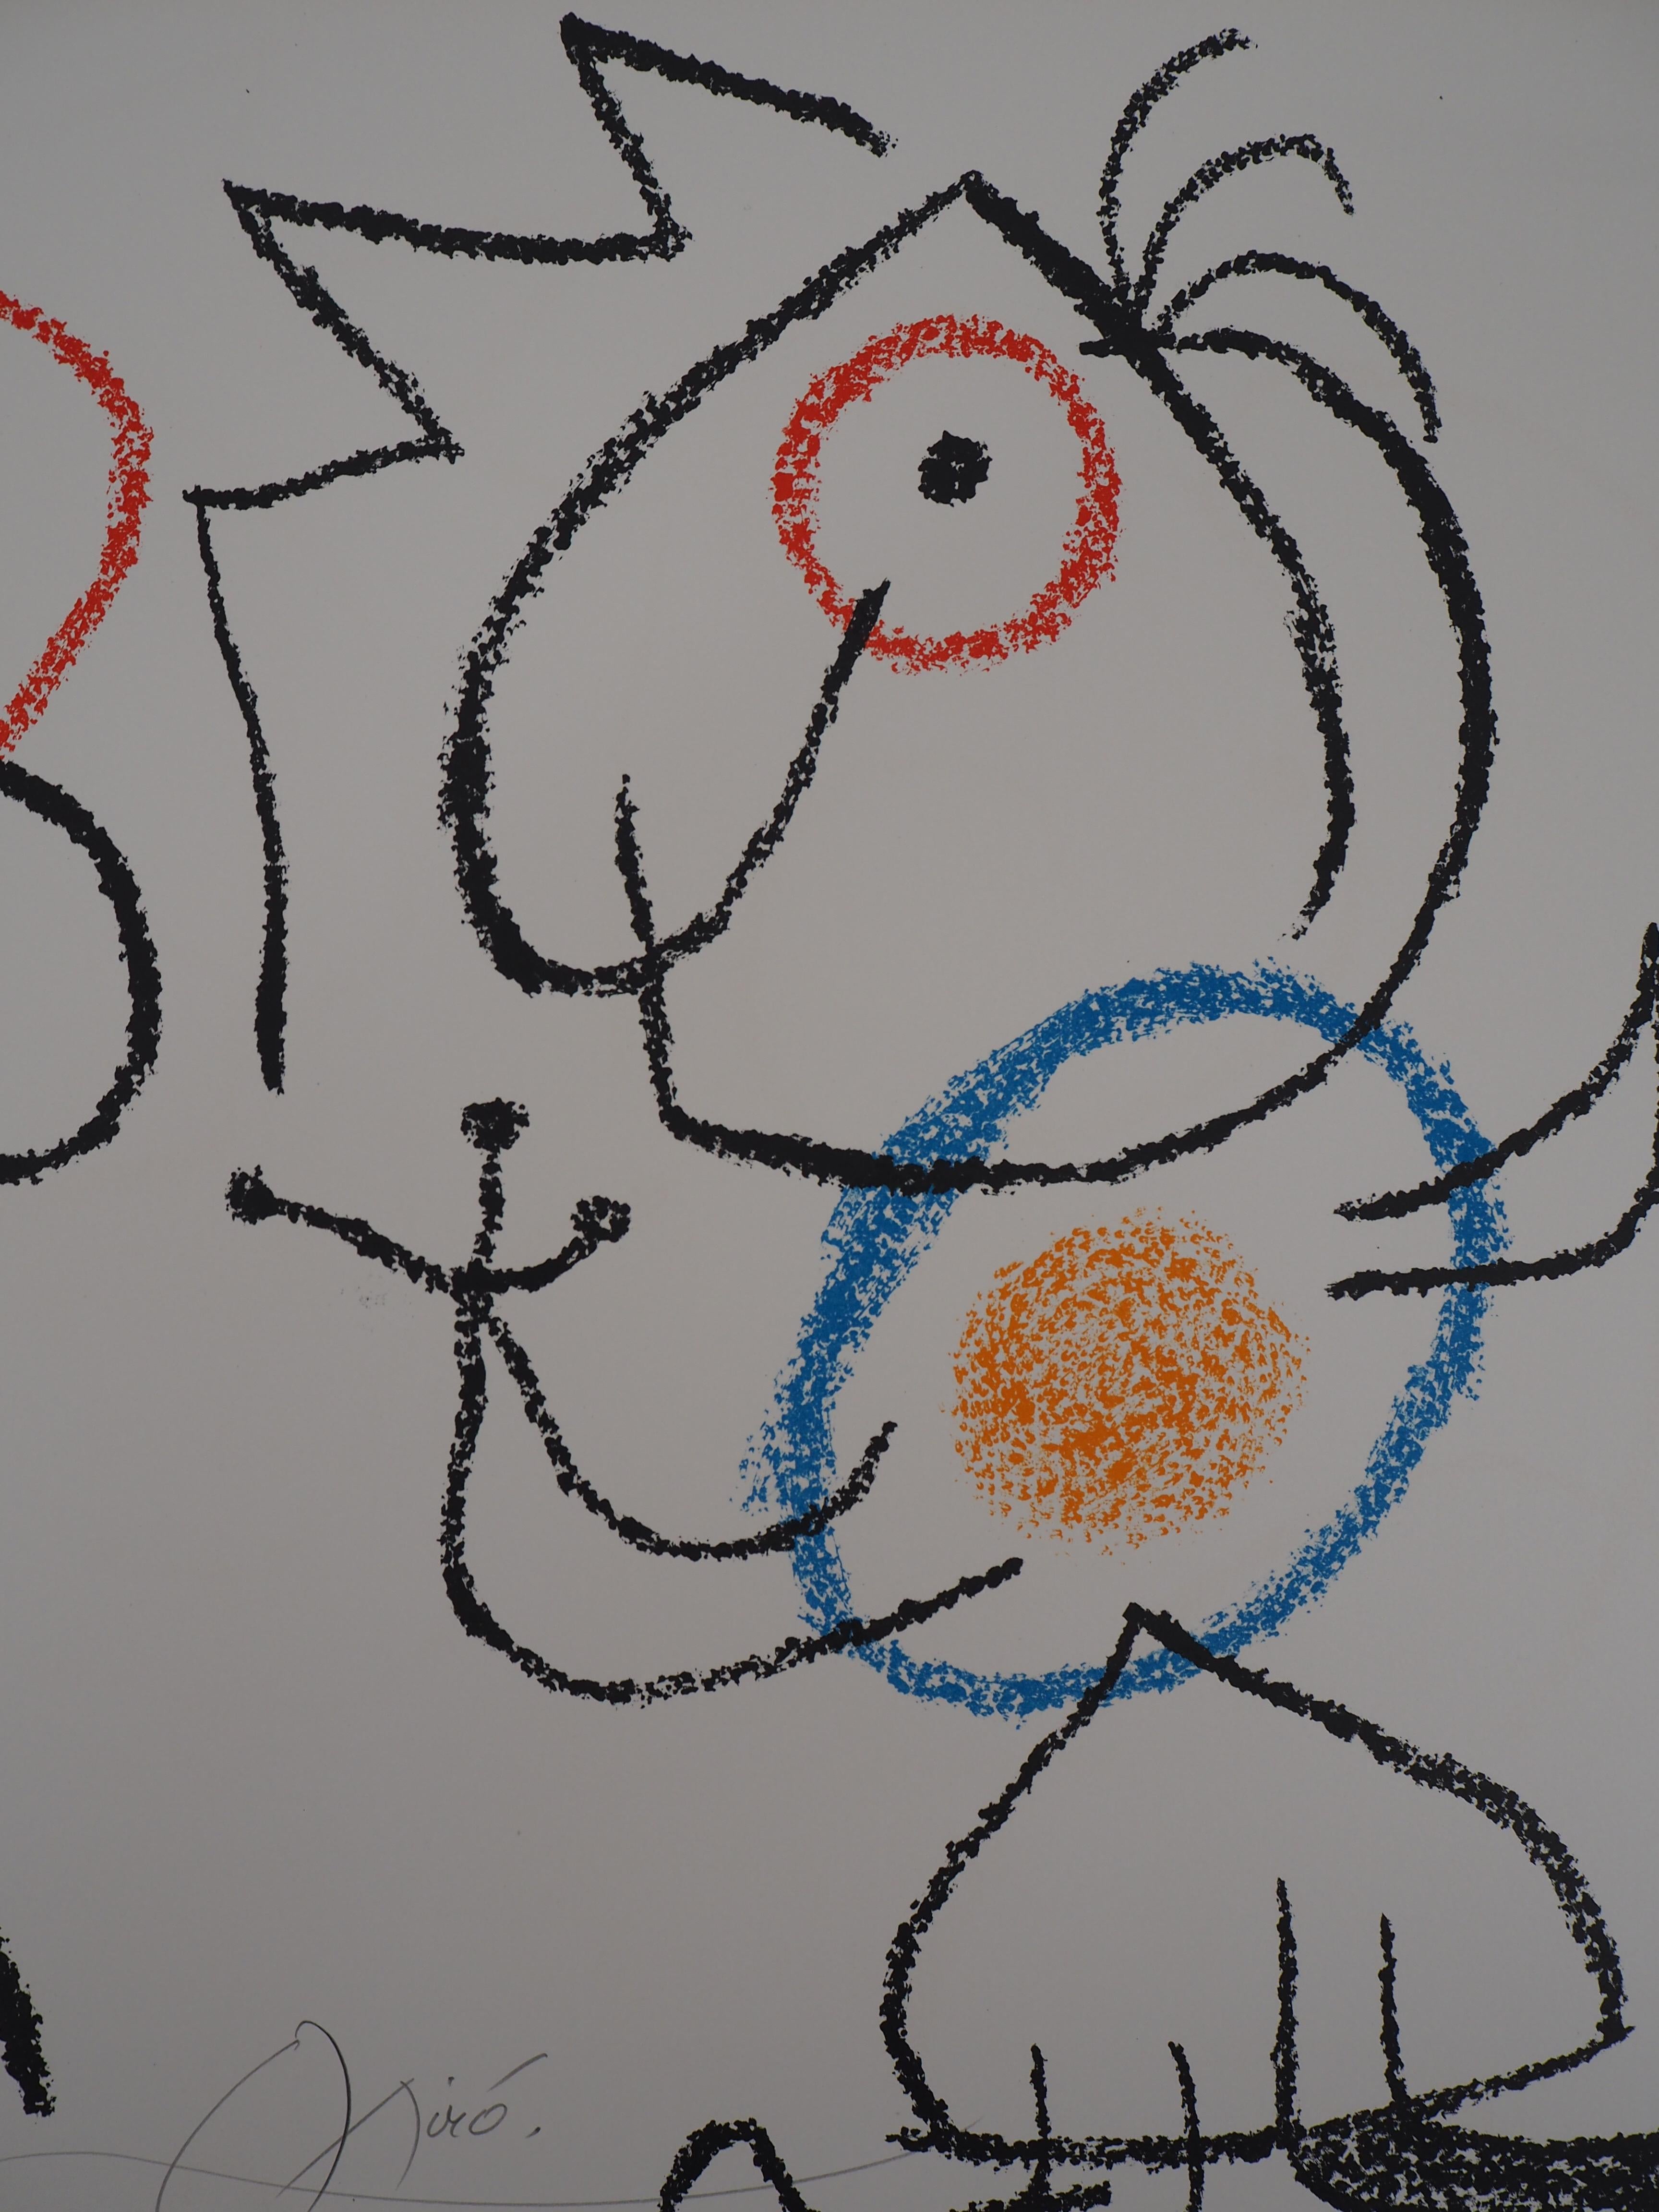 Ubu : King and Man Speaking - Original Handsigned Lithograph - Mourlot, 1971 - Gray Abstract Print by Joan Miró